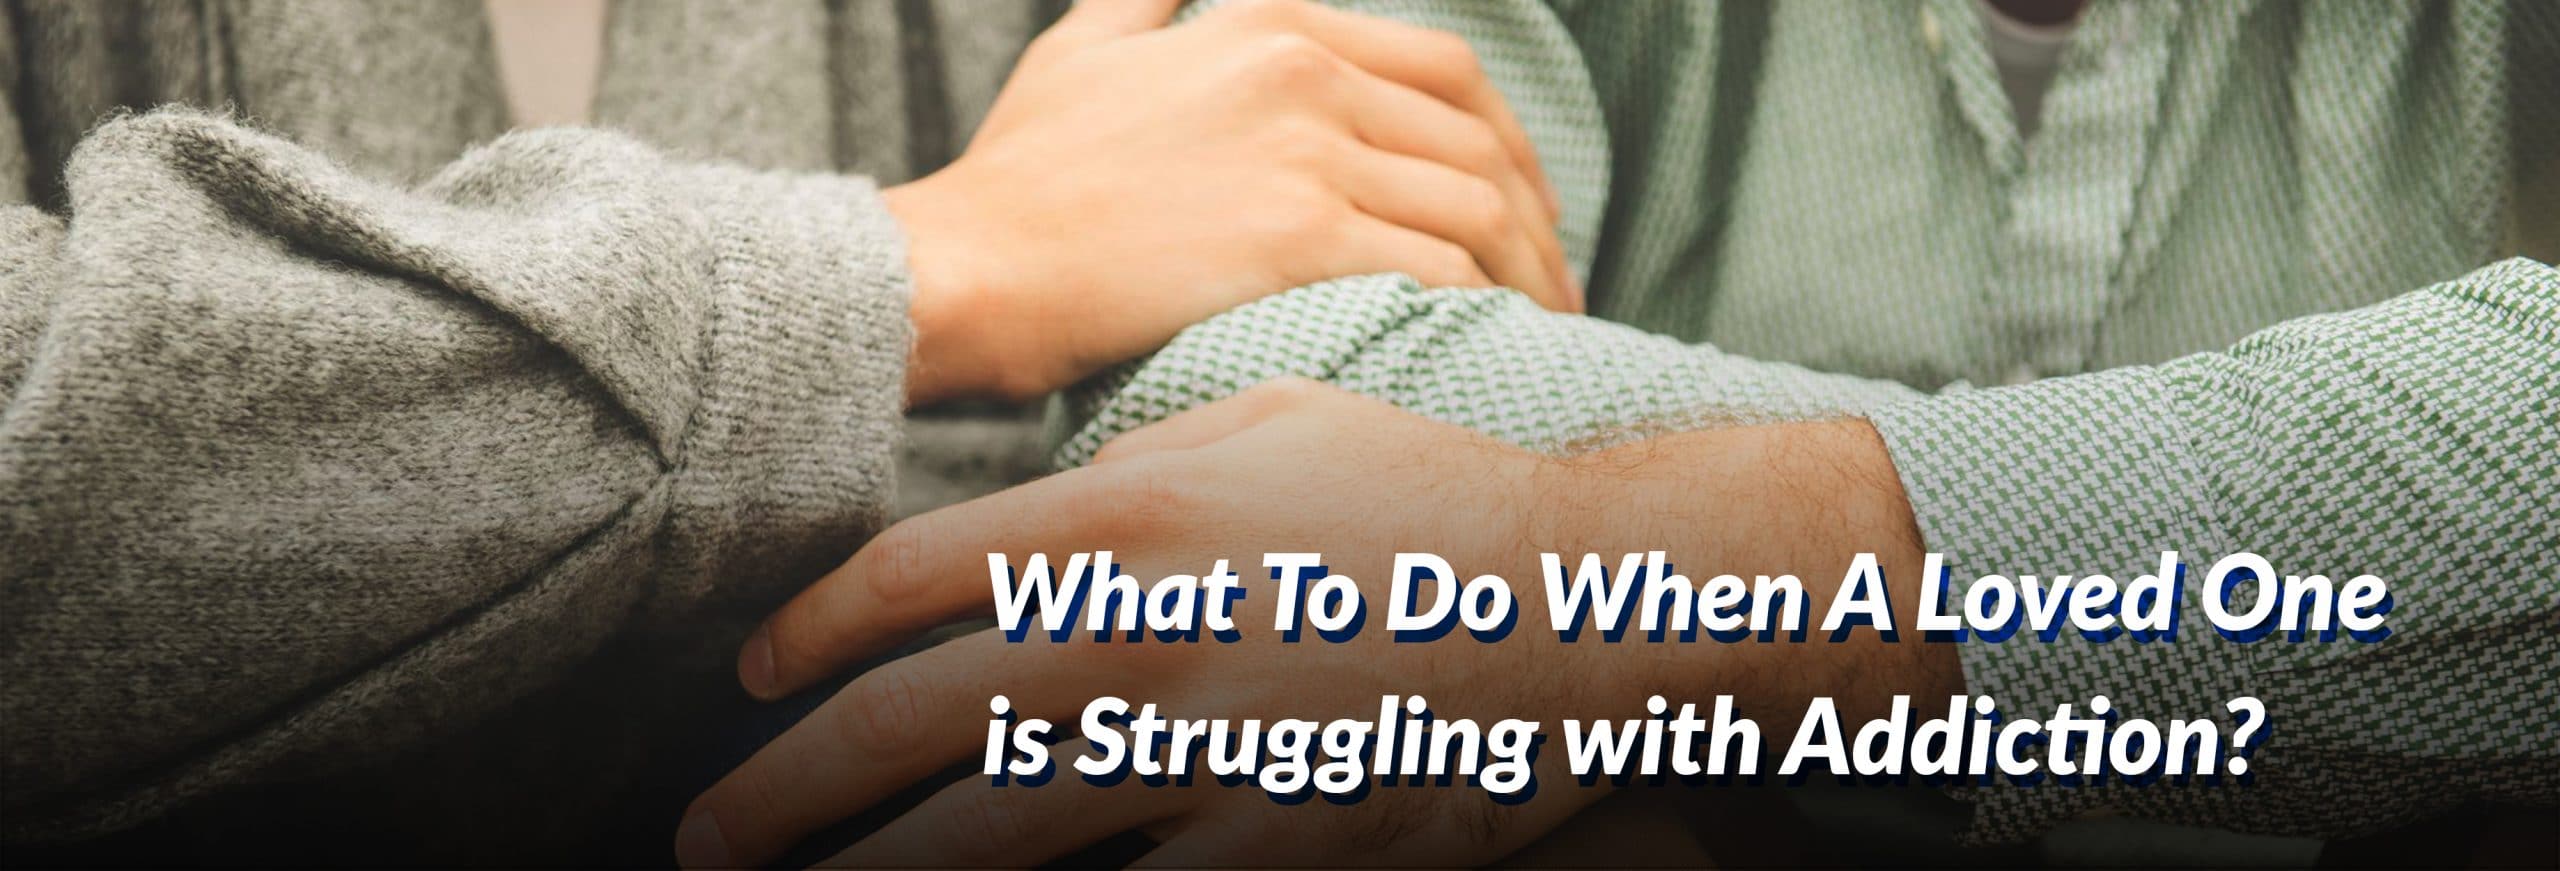 What To Do When A Loved One Is Struggling With Addiction?